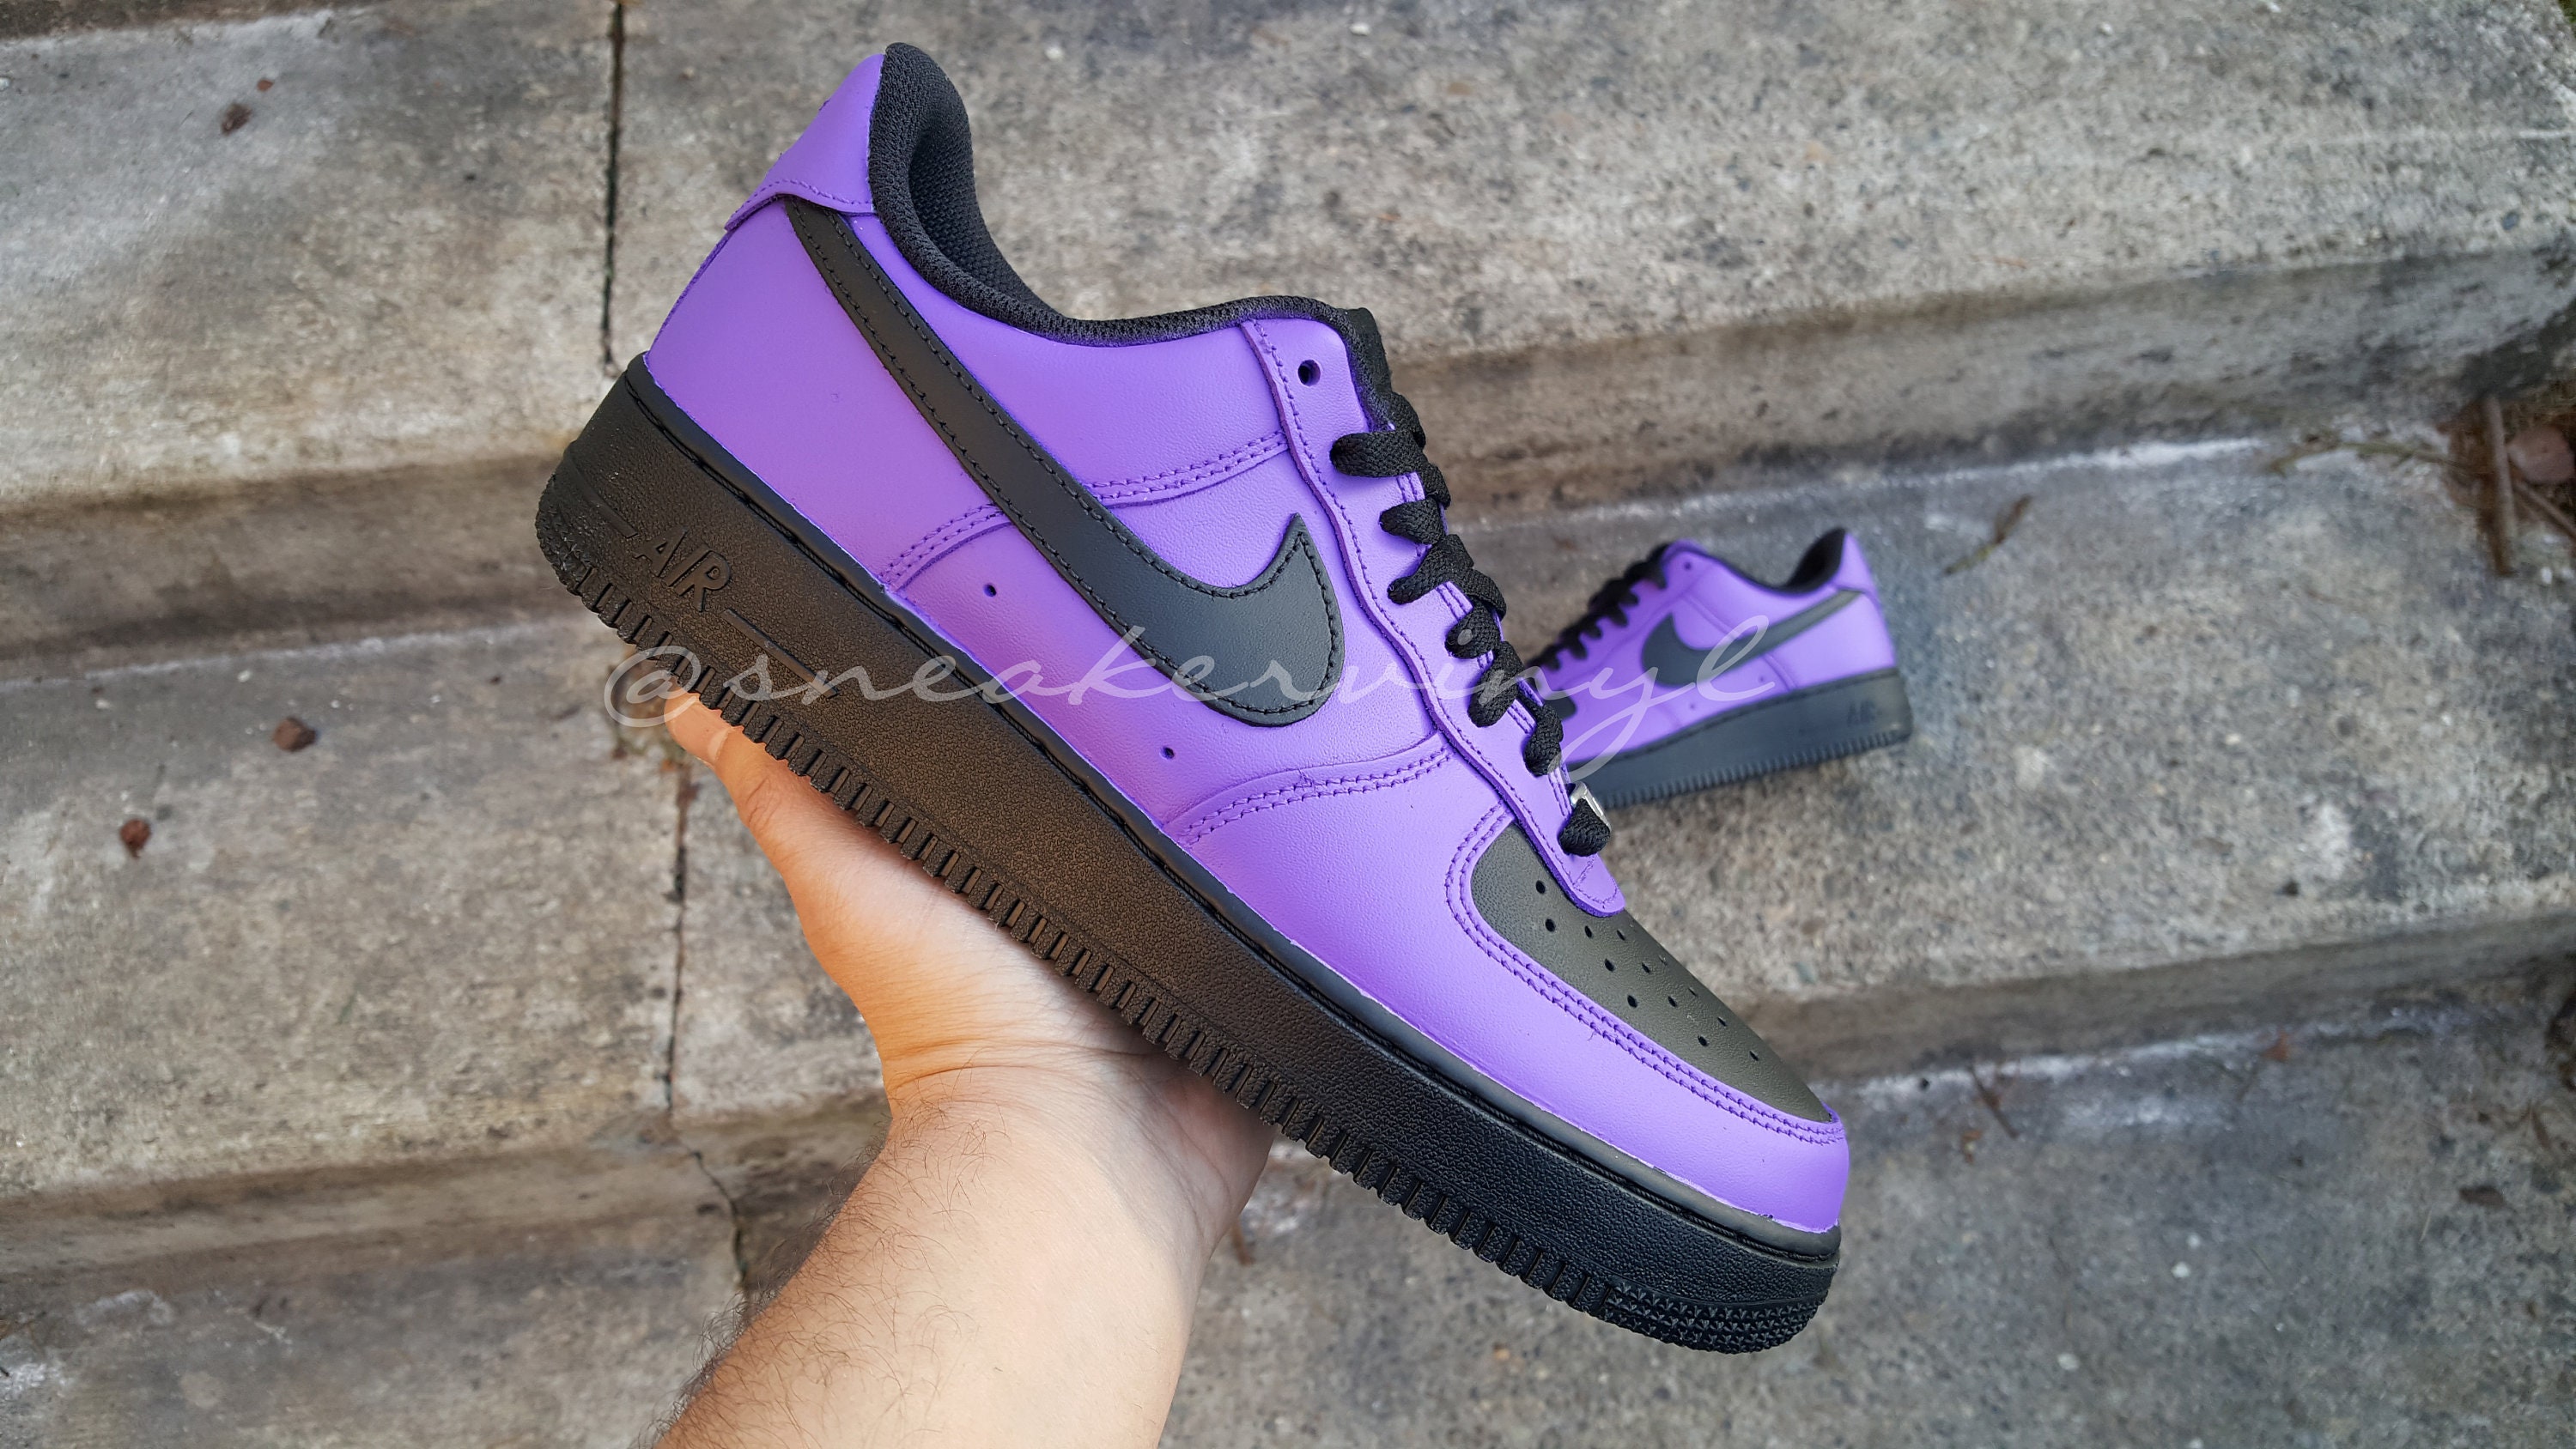 purple and black forces